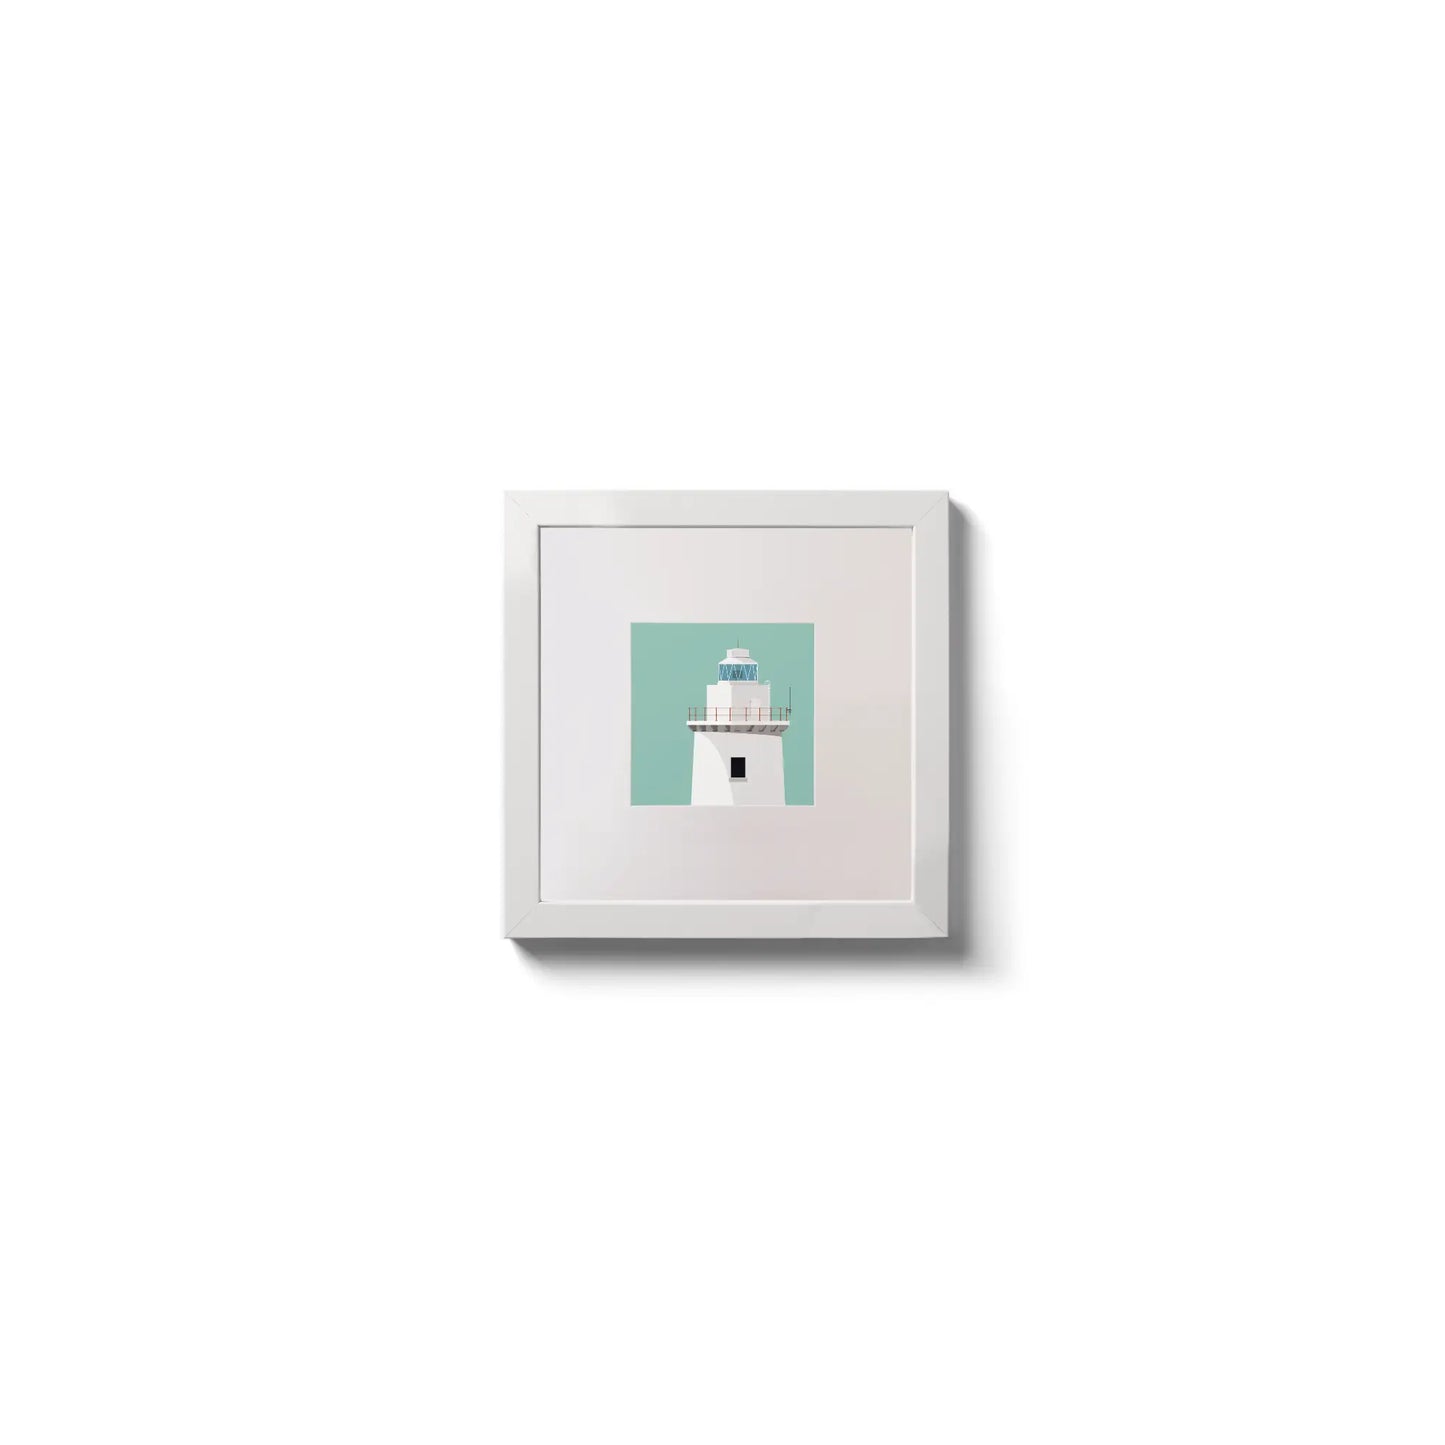 Illustration of Ardnakinna lighthouse on an ocean green background,  in a white square frame measuring 10x10cm.